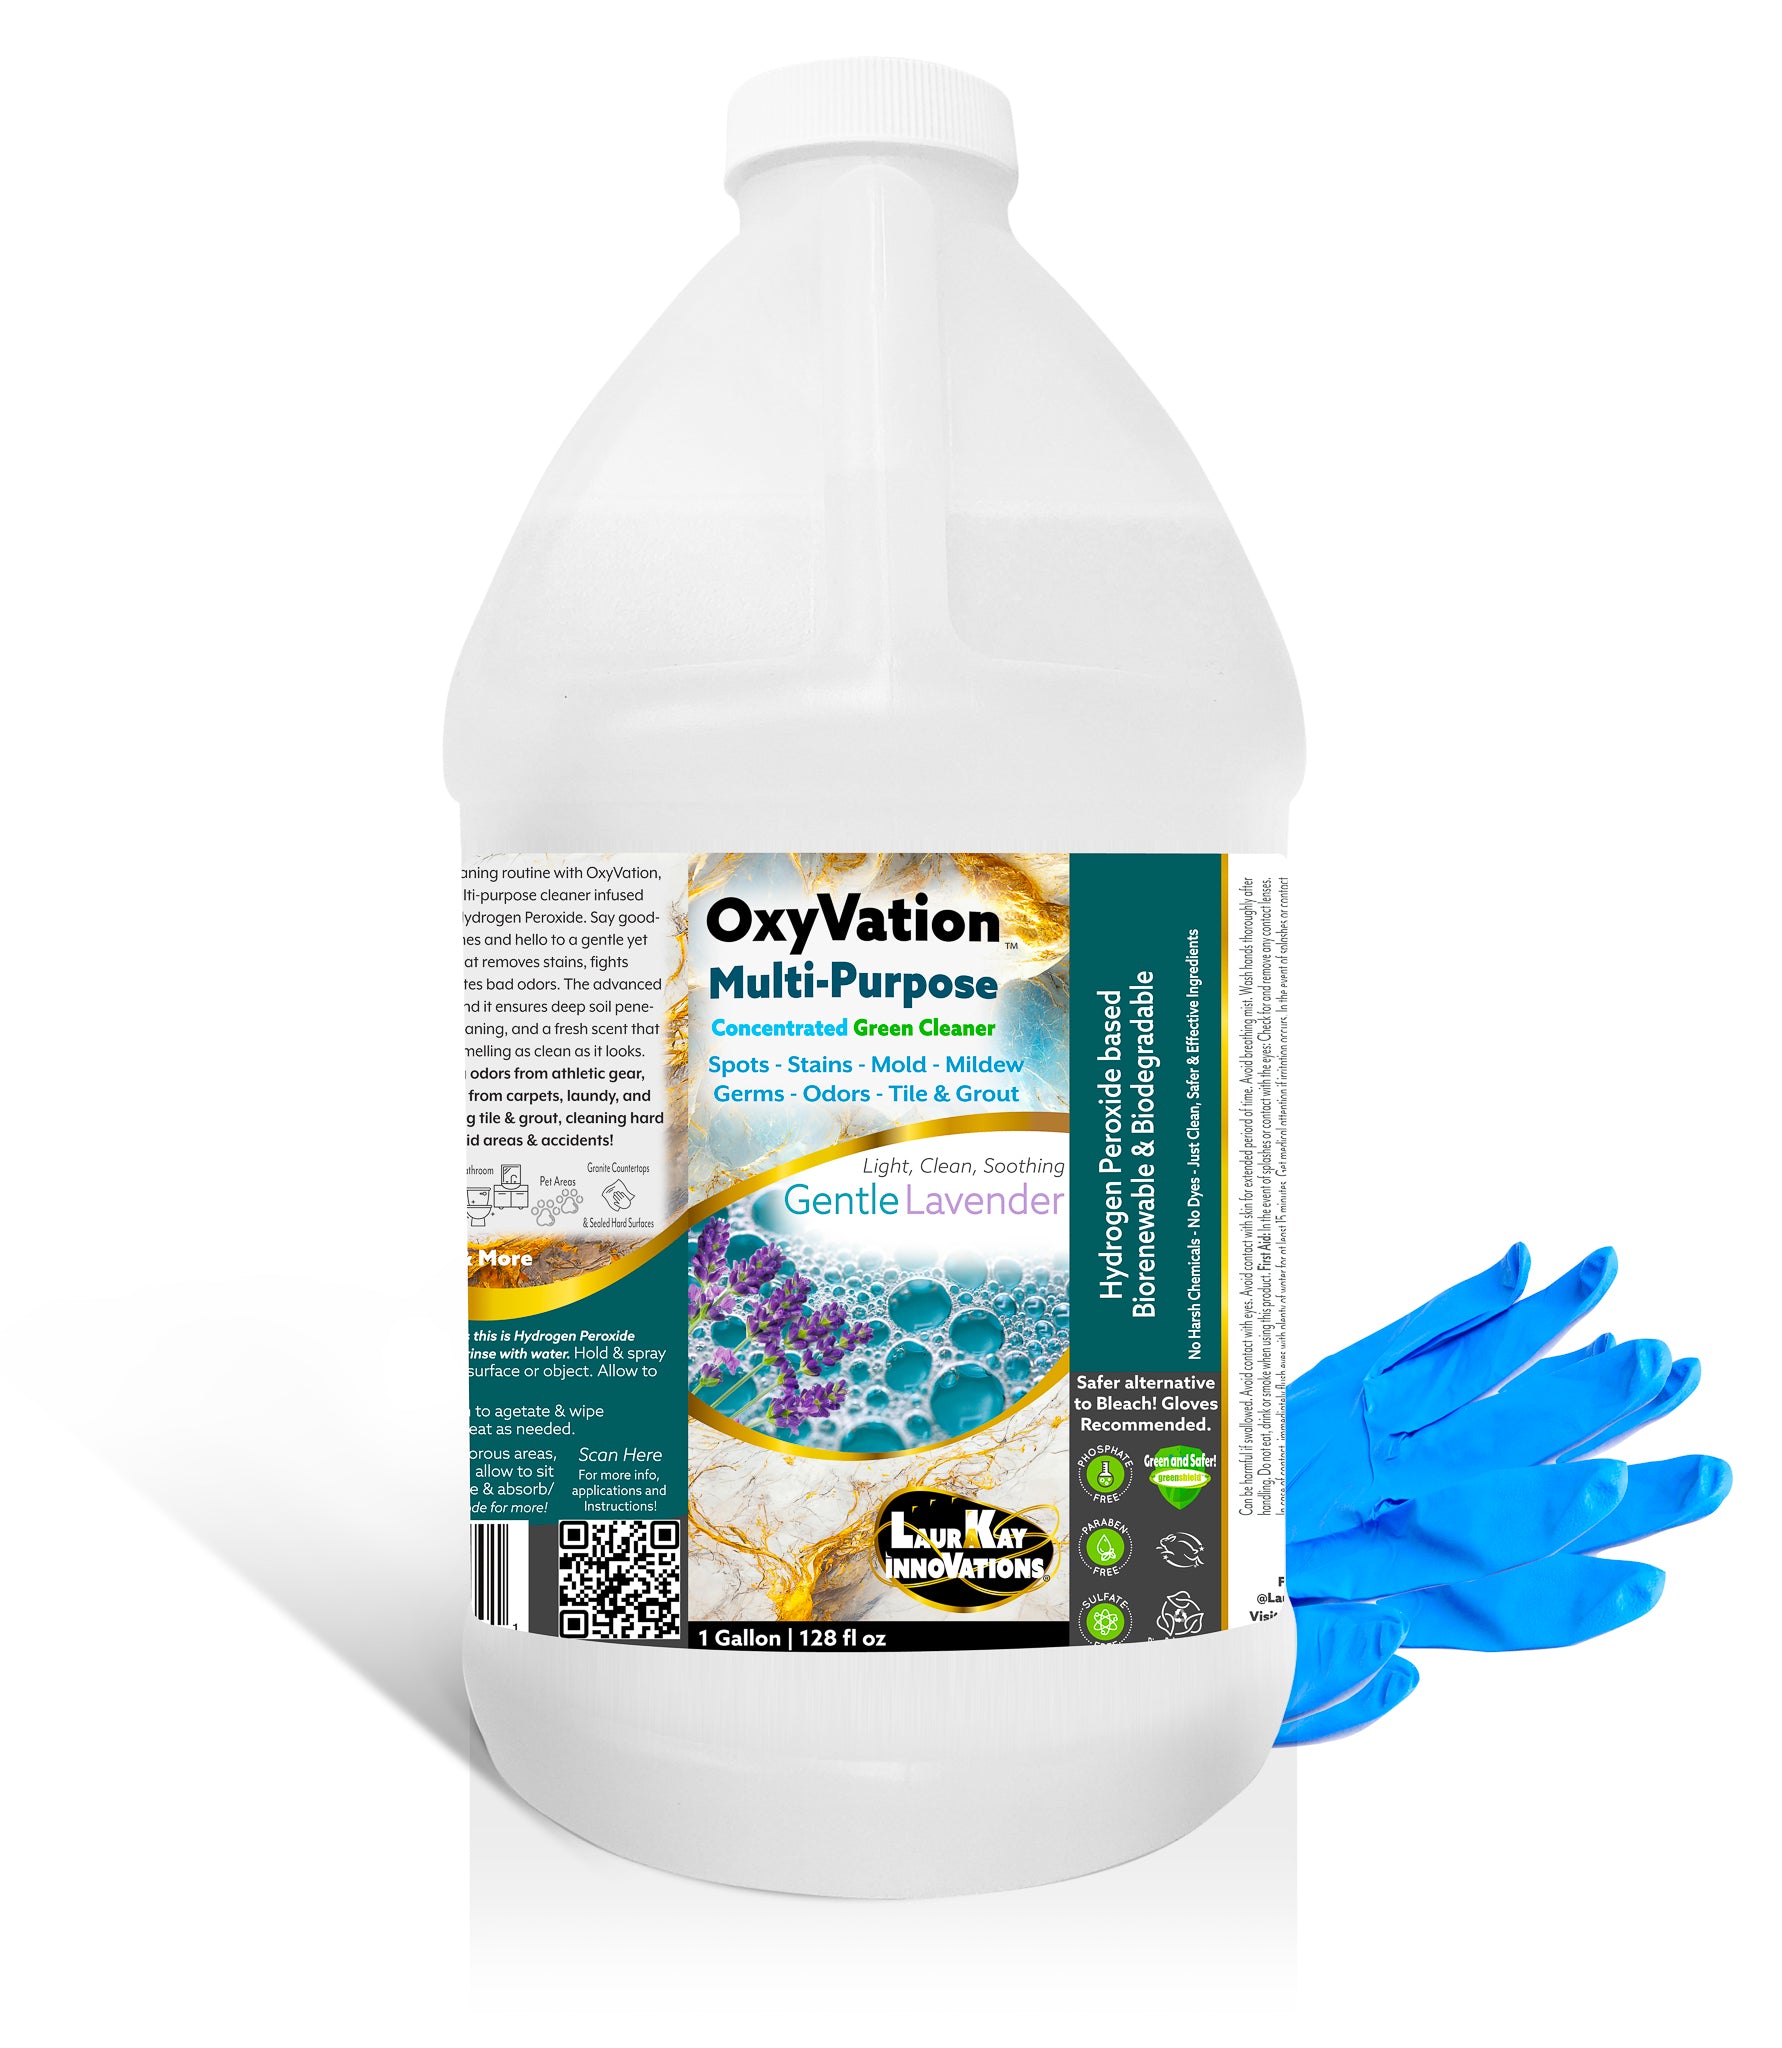 OxyVation™ 3 in 1 Germ & Virus Fighting, Stain and Odor, and Multi-Surface Green Cleaning 1 Gallon Refill - Gentle Lavender